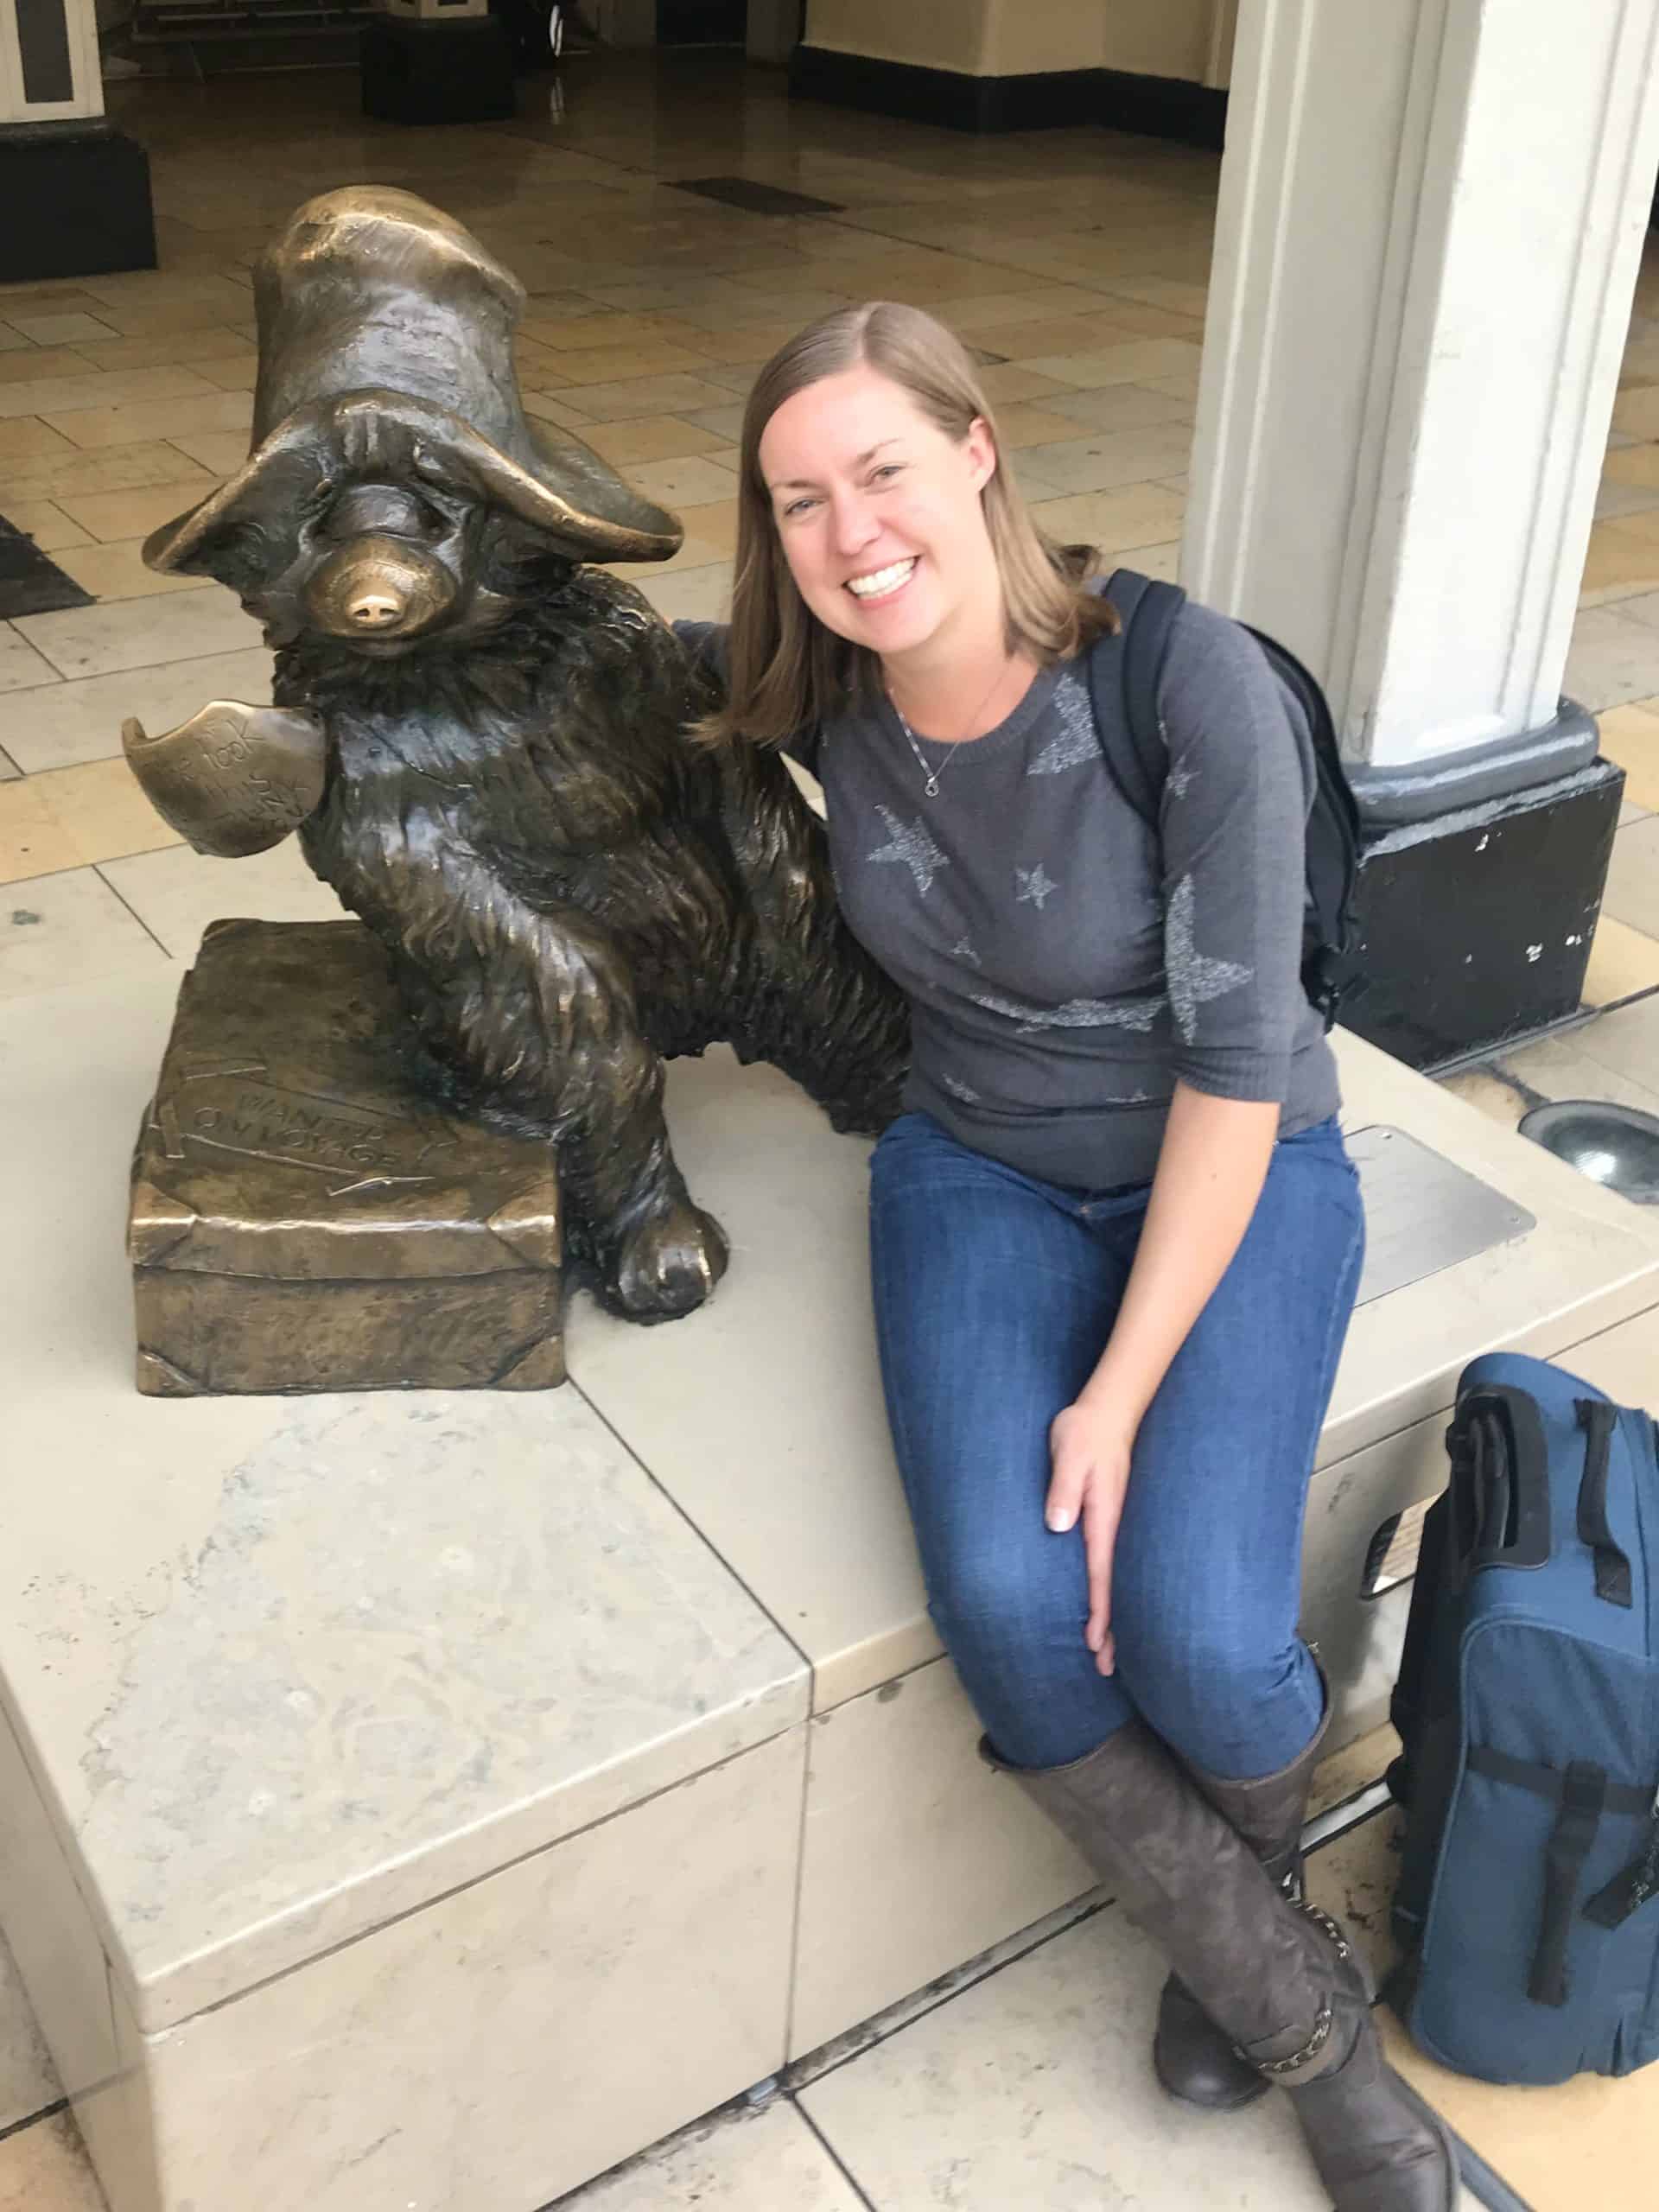 Joannda with her Eastpak carry on suitcase by Paddington Bear statue